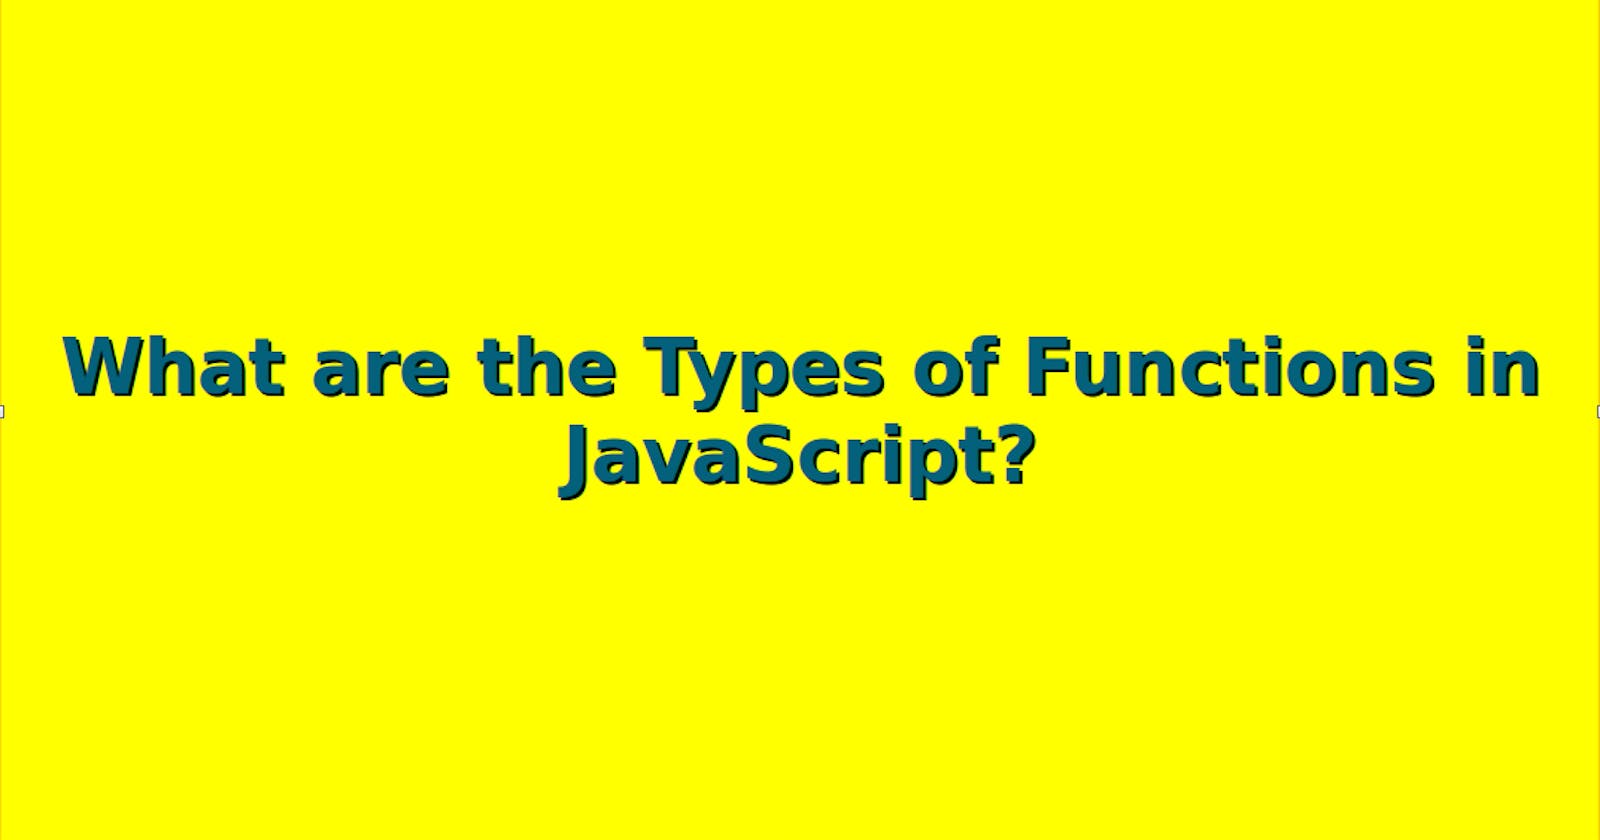 What are the Types of Functions in JavaScript?